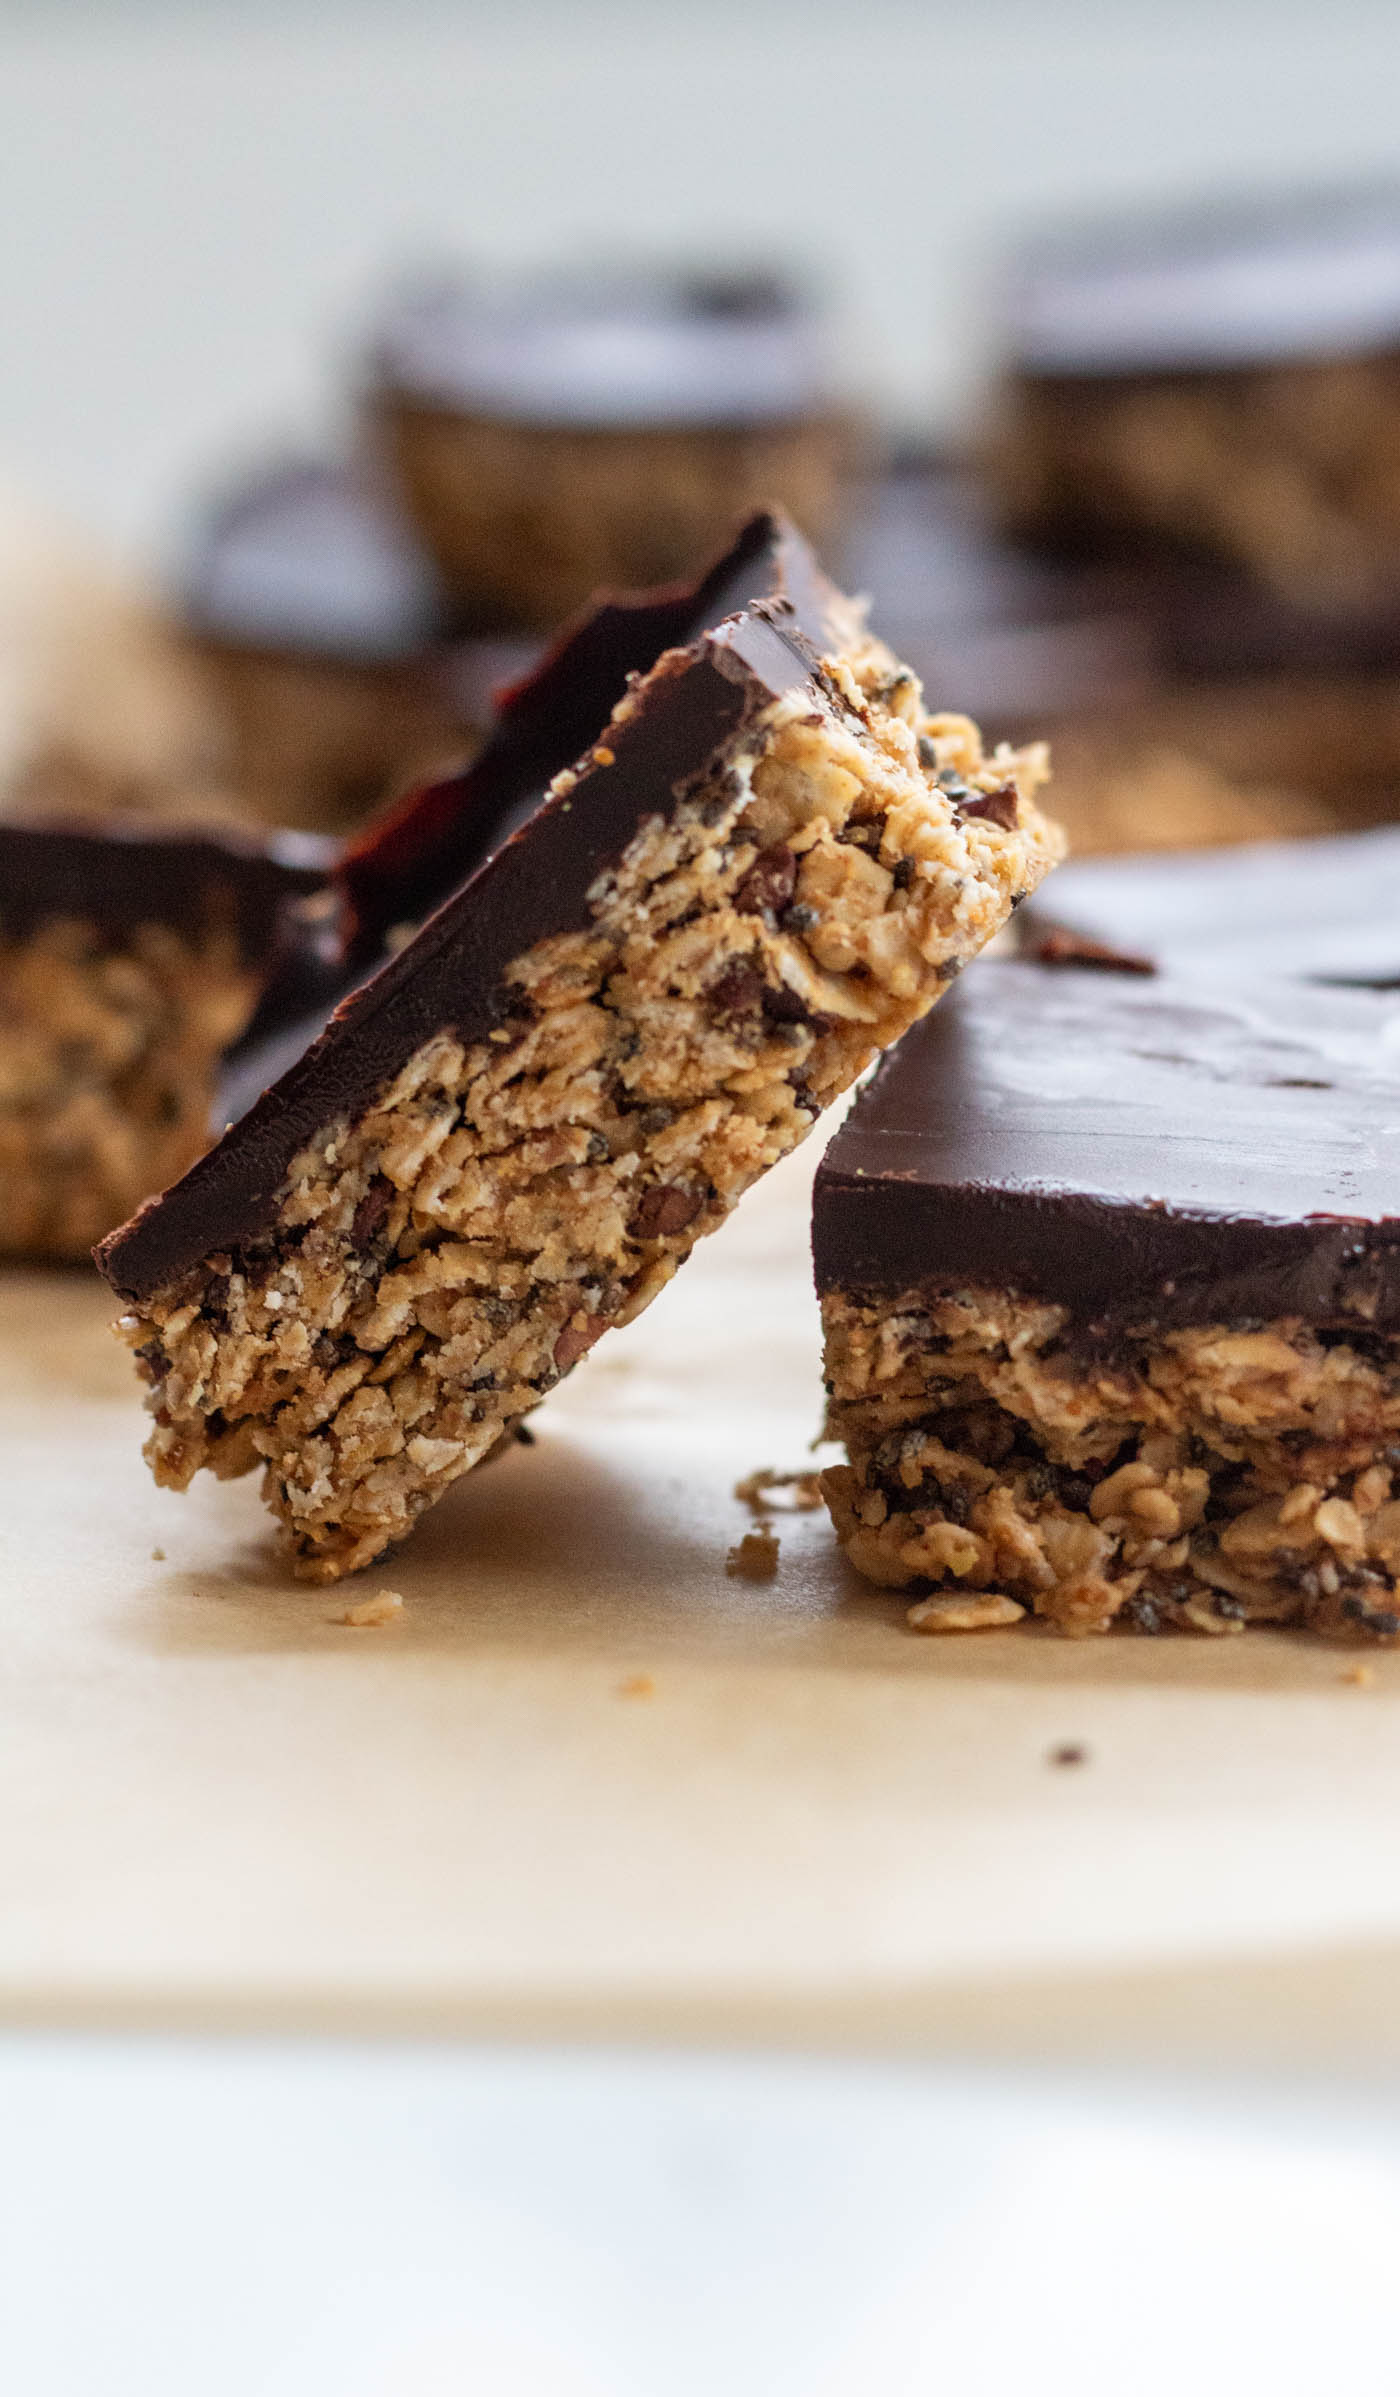 a no bake chocolate oat bars leaning on another oat bar